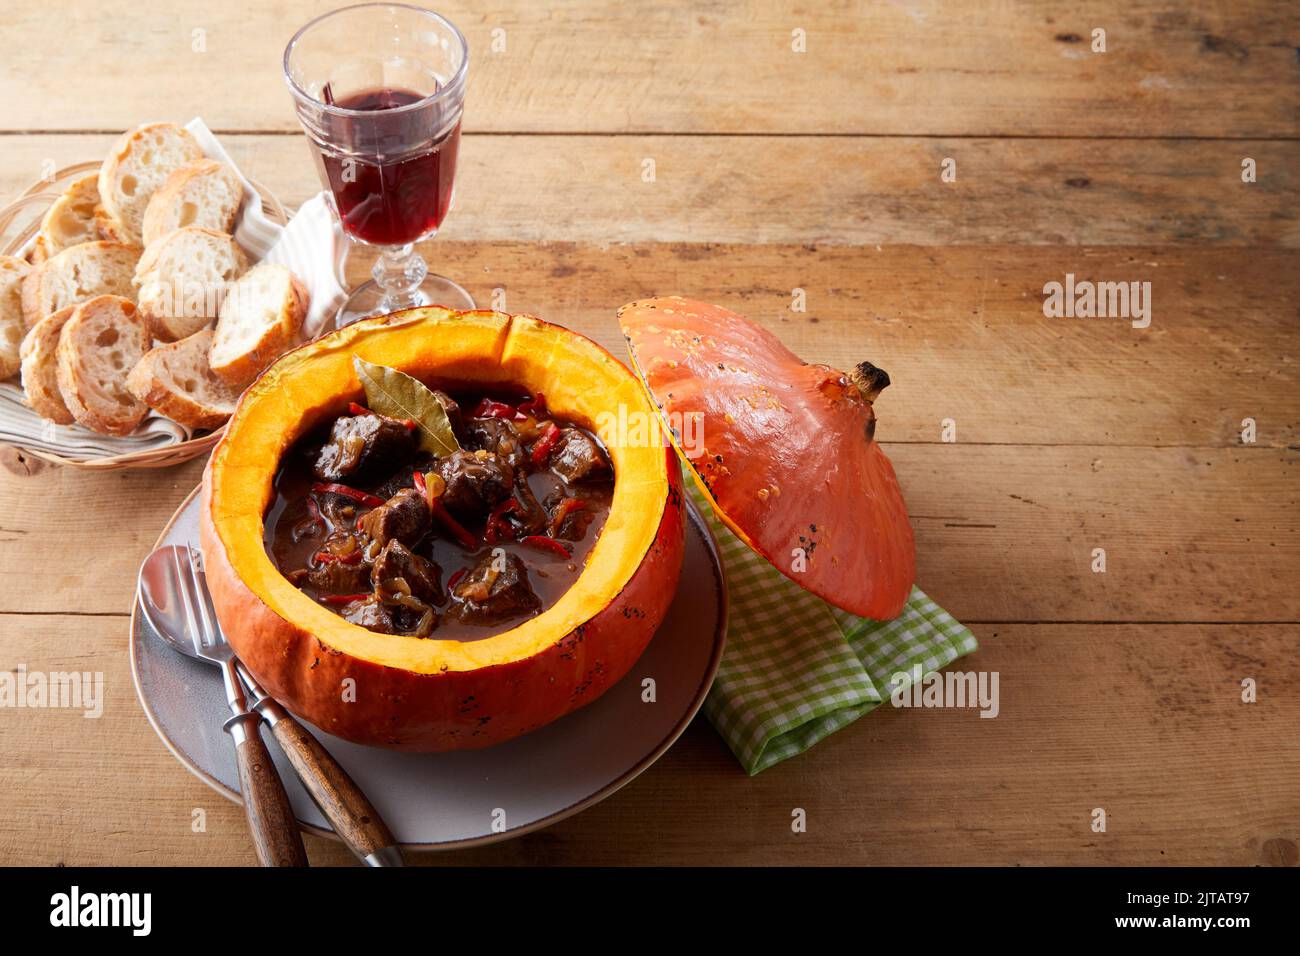 From above delicious meat goulash served in pumpkin near plate with bread pieces and glass of red wine on timber table during lunch Stock Photo